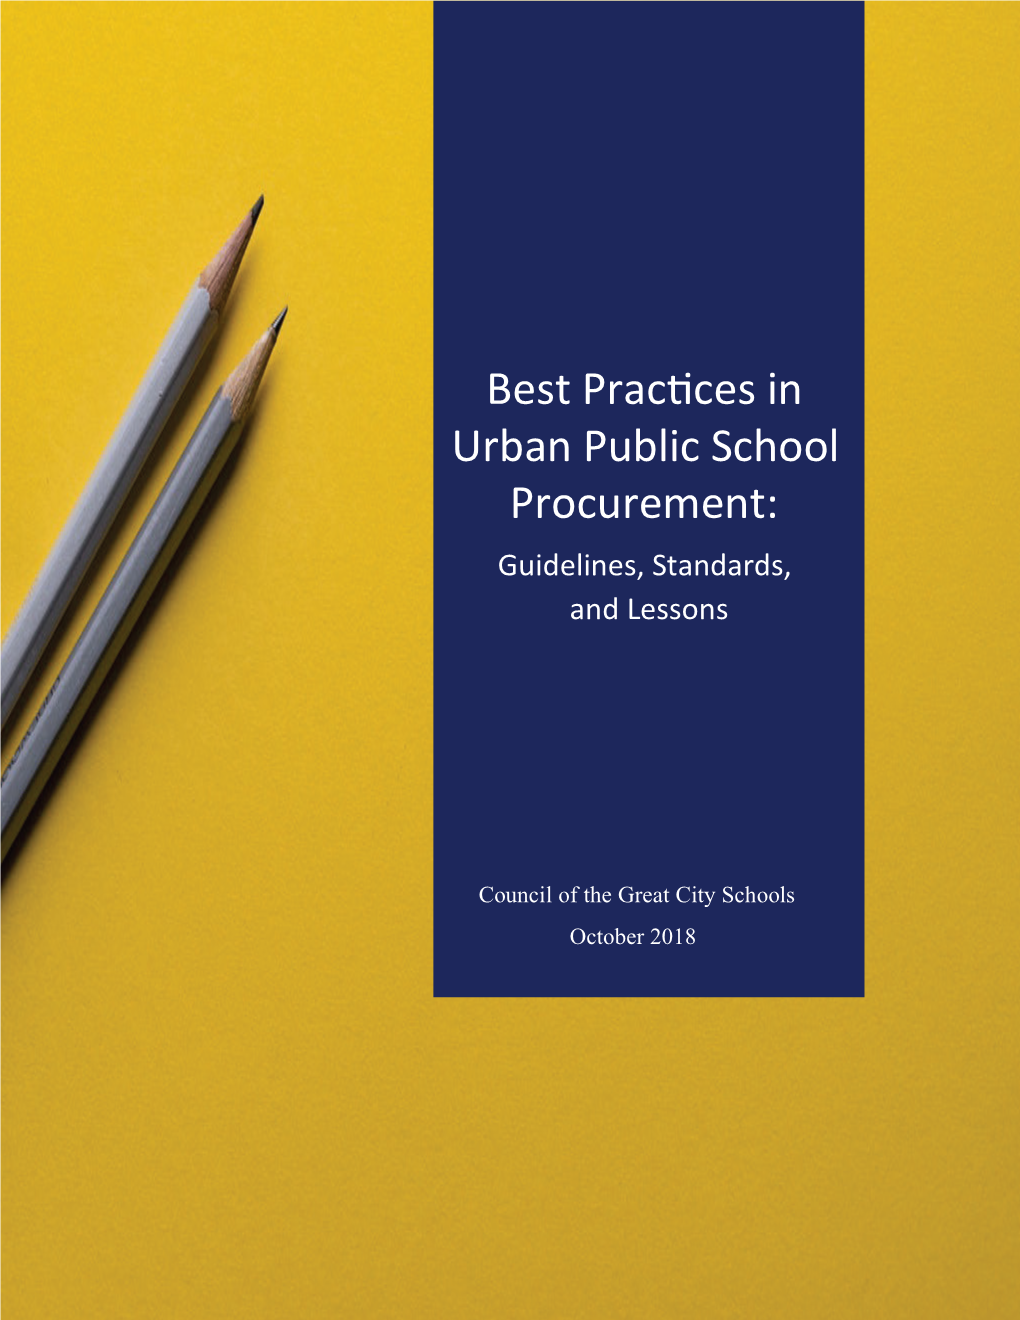 Best Practices in Urban Public School Procurement: Guidelines, Standards, and Lessons